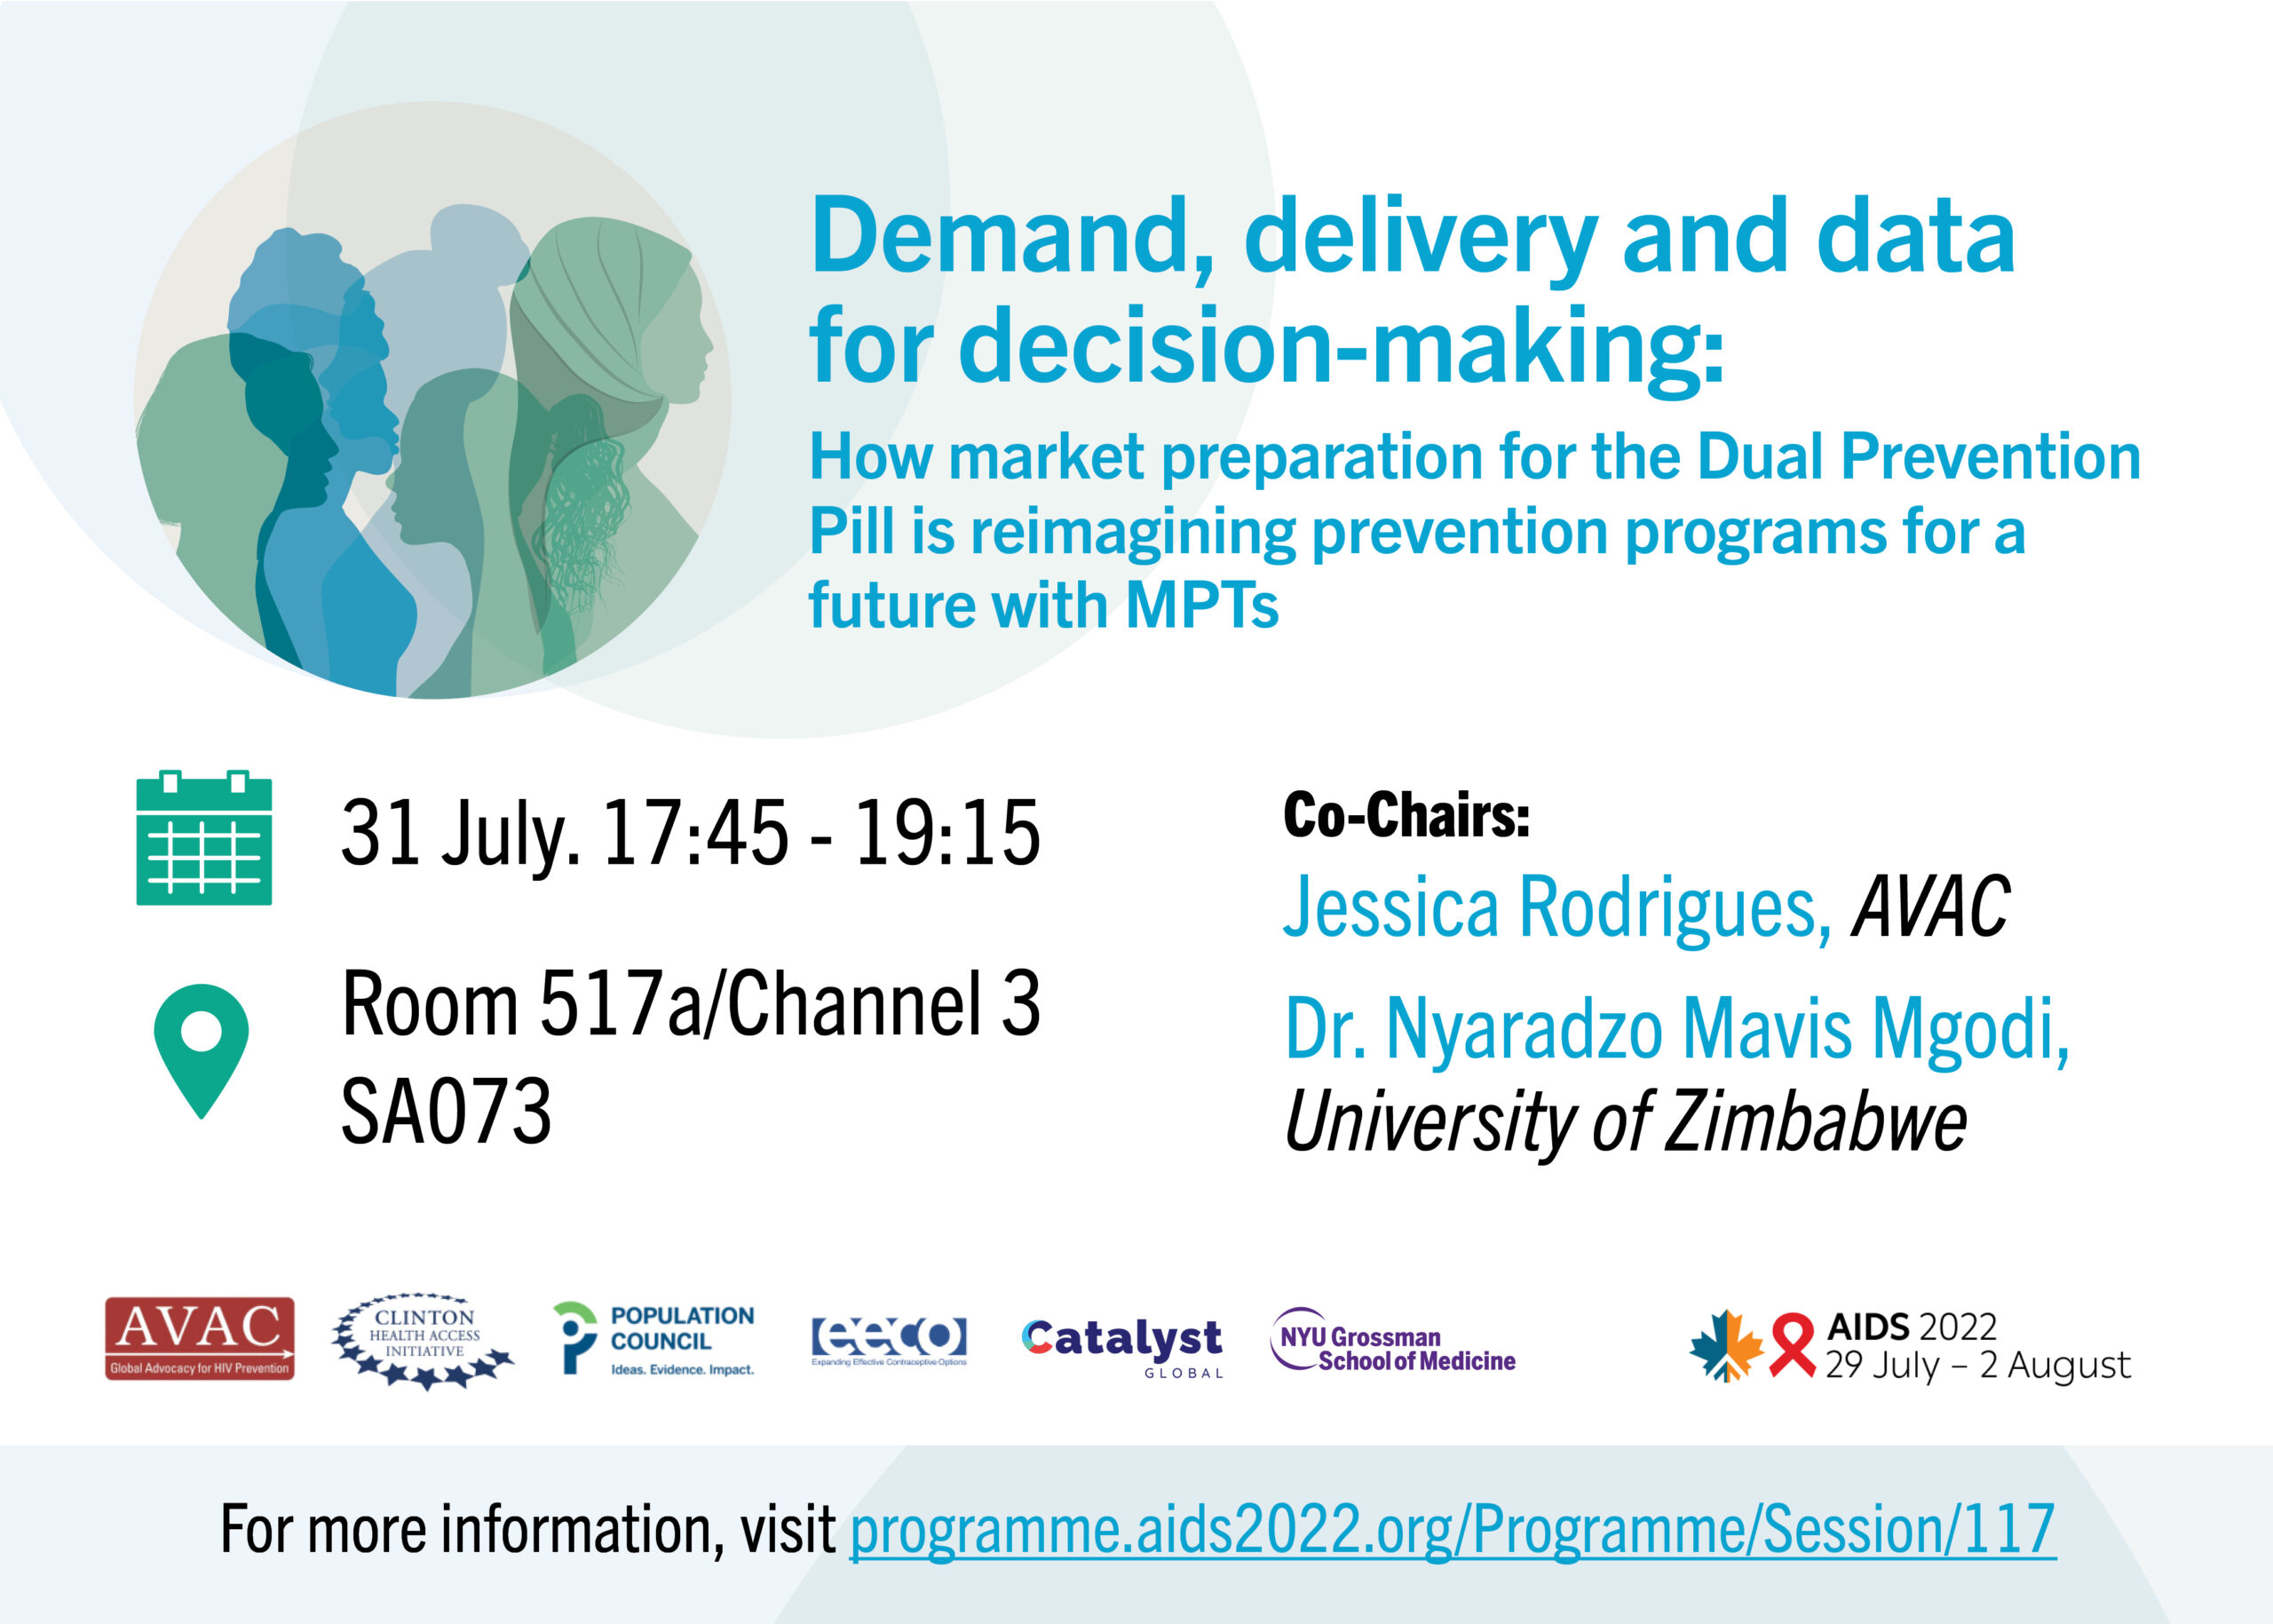 flyer for demand, delivery and data for decision-making meeting